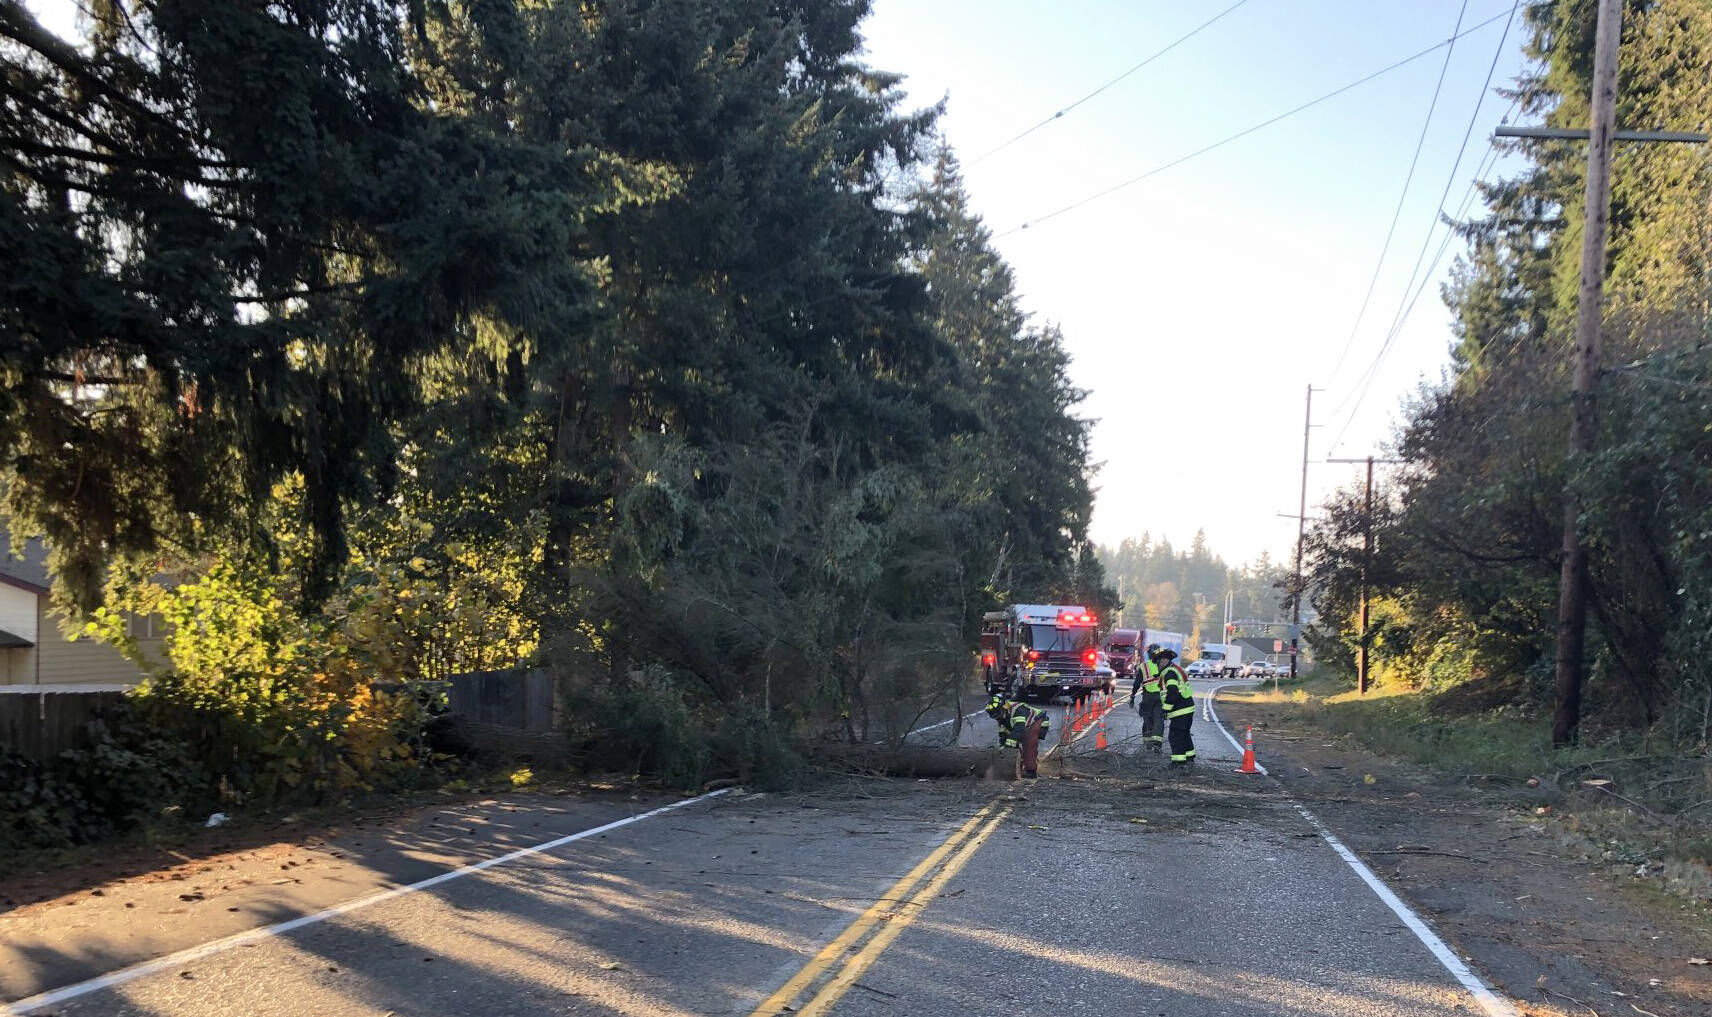 Puget Sound Fire responds to a fallen tree Thursday morning, Nov. 17 along Military Road South in Kent near South 36th Street. COURTESY PHOTO, Puget Sound Fire